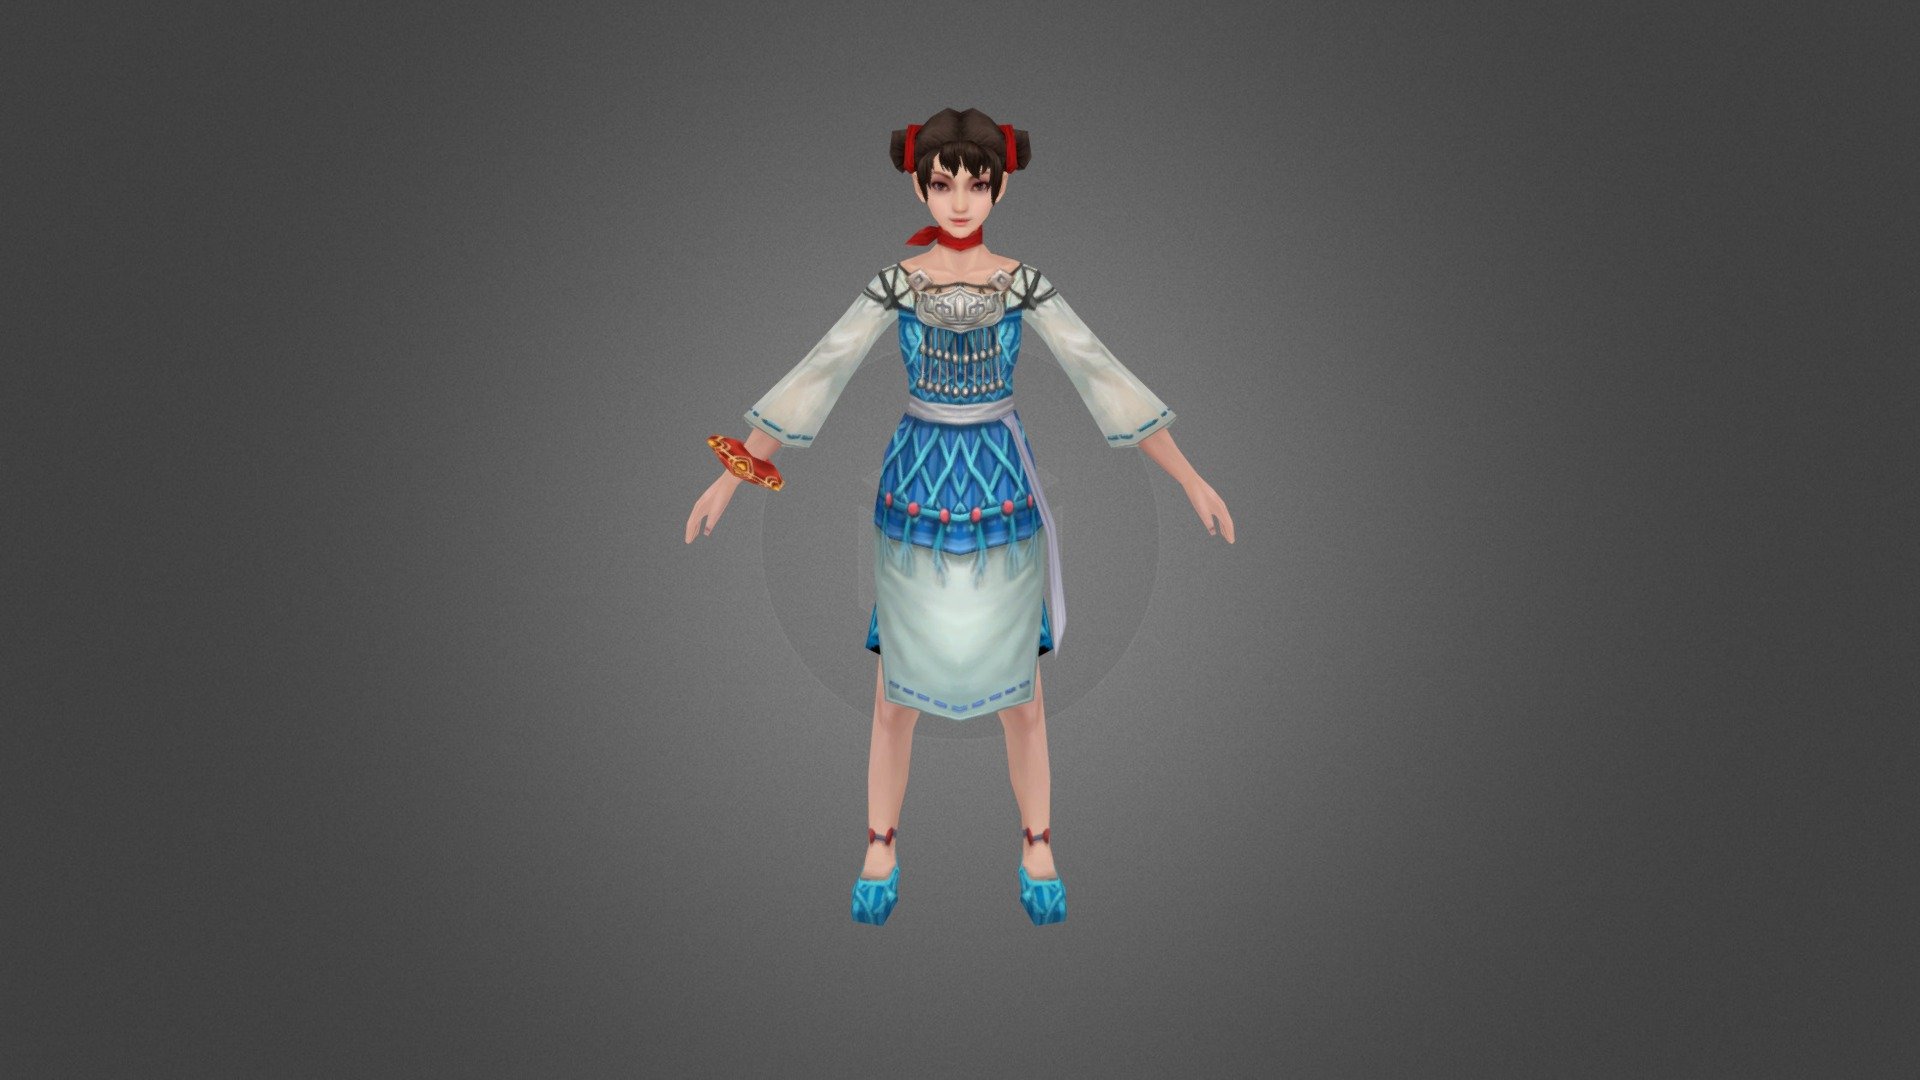 Download Young Girl Rigged 3D Model. You can use this model in video games, cartoons, anime, and other CG arts. Rigged with popular Blender Auto Rig Pro addon and supports all animations from Mixamo,…

The Sketchfab version does not include rig, you can download the rigged version from the website:
https://cg-moon.com/product/character-14/

Hope you like this model :)

For more characters please take a look at our website 3d model